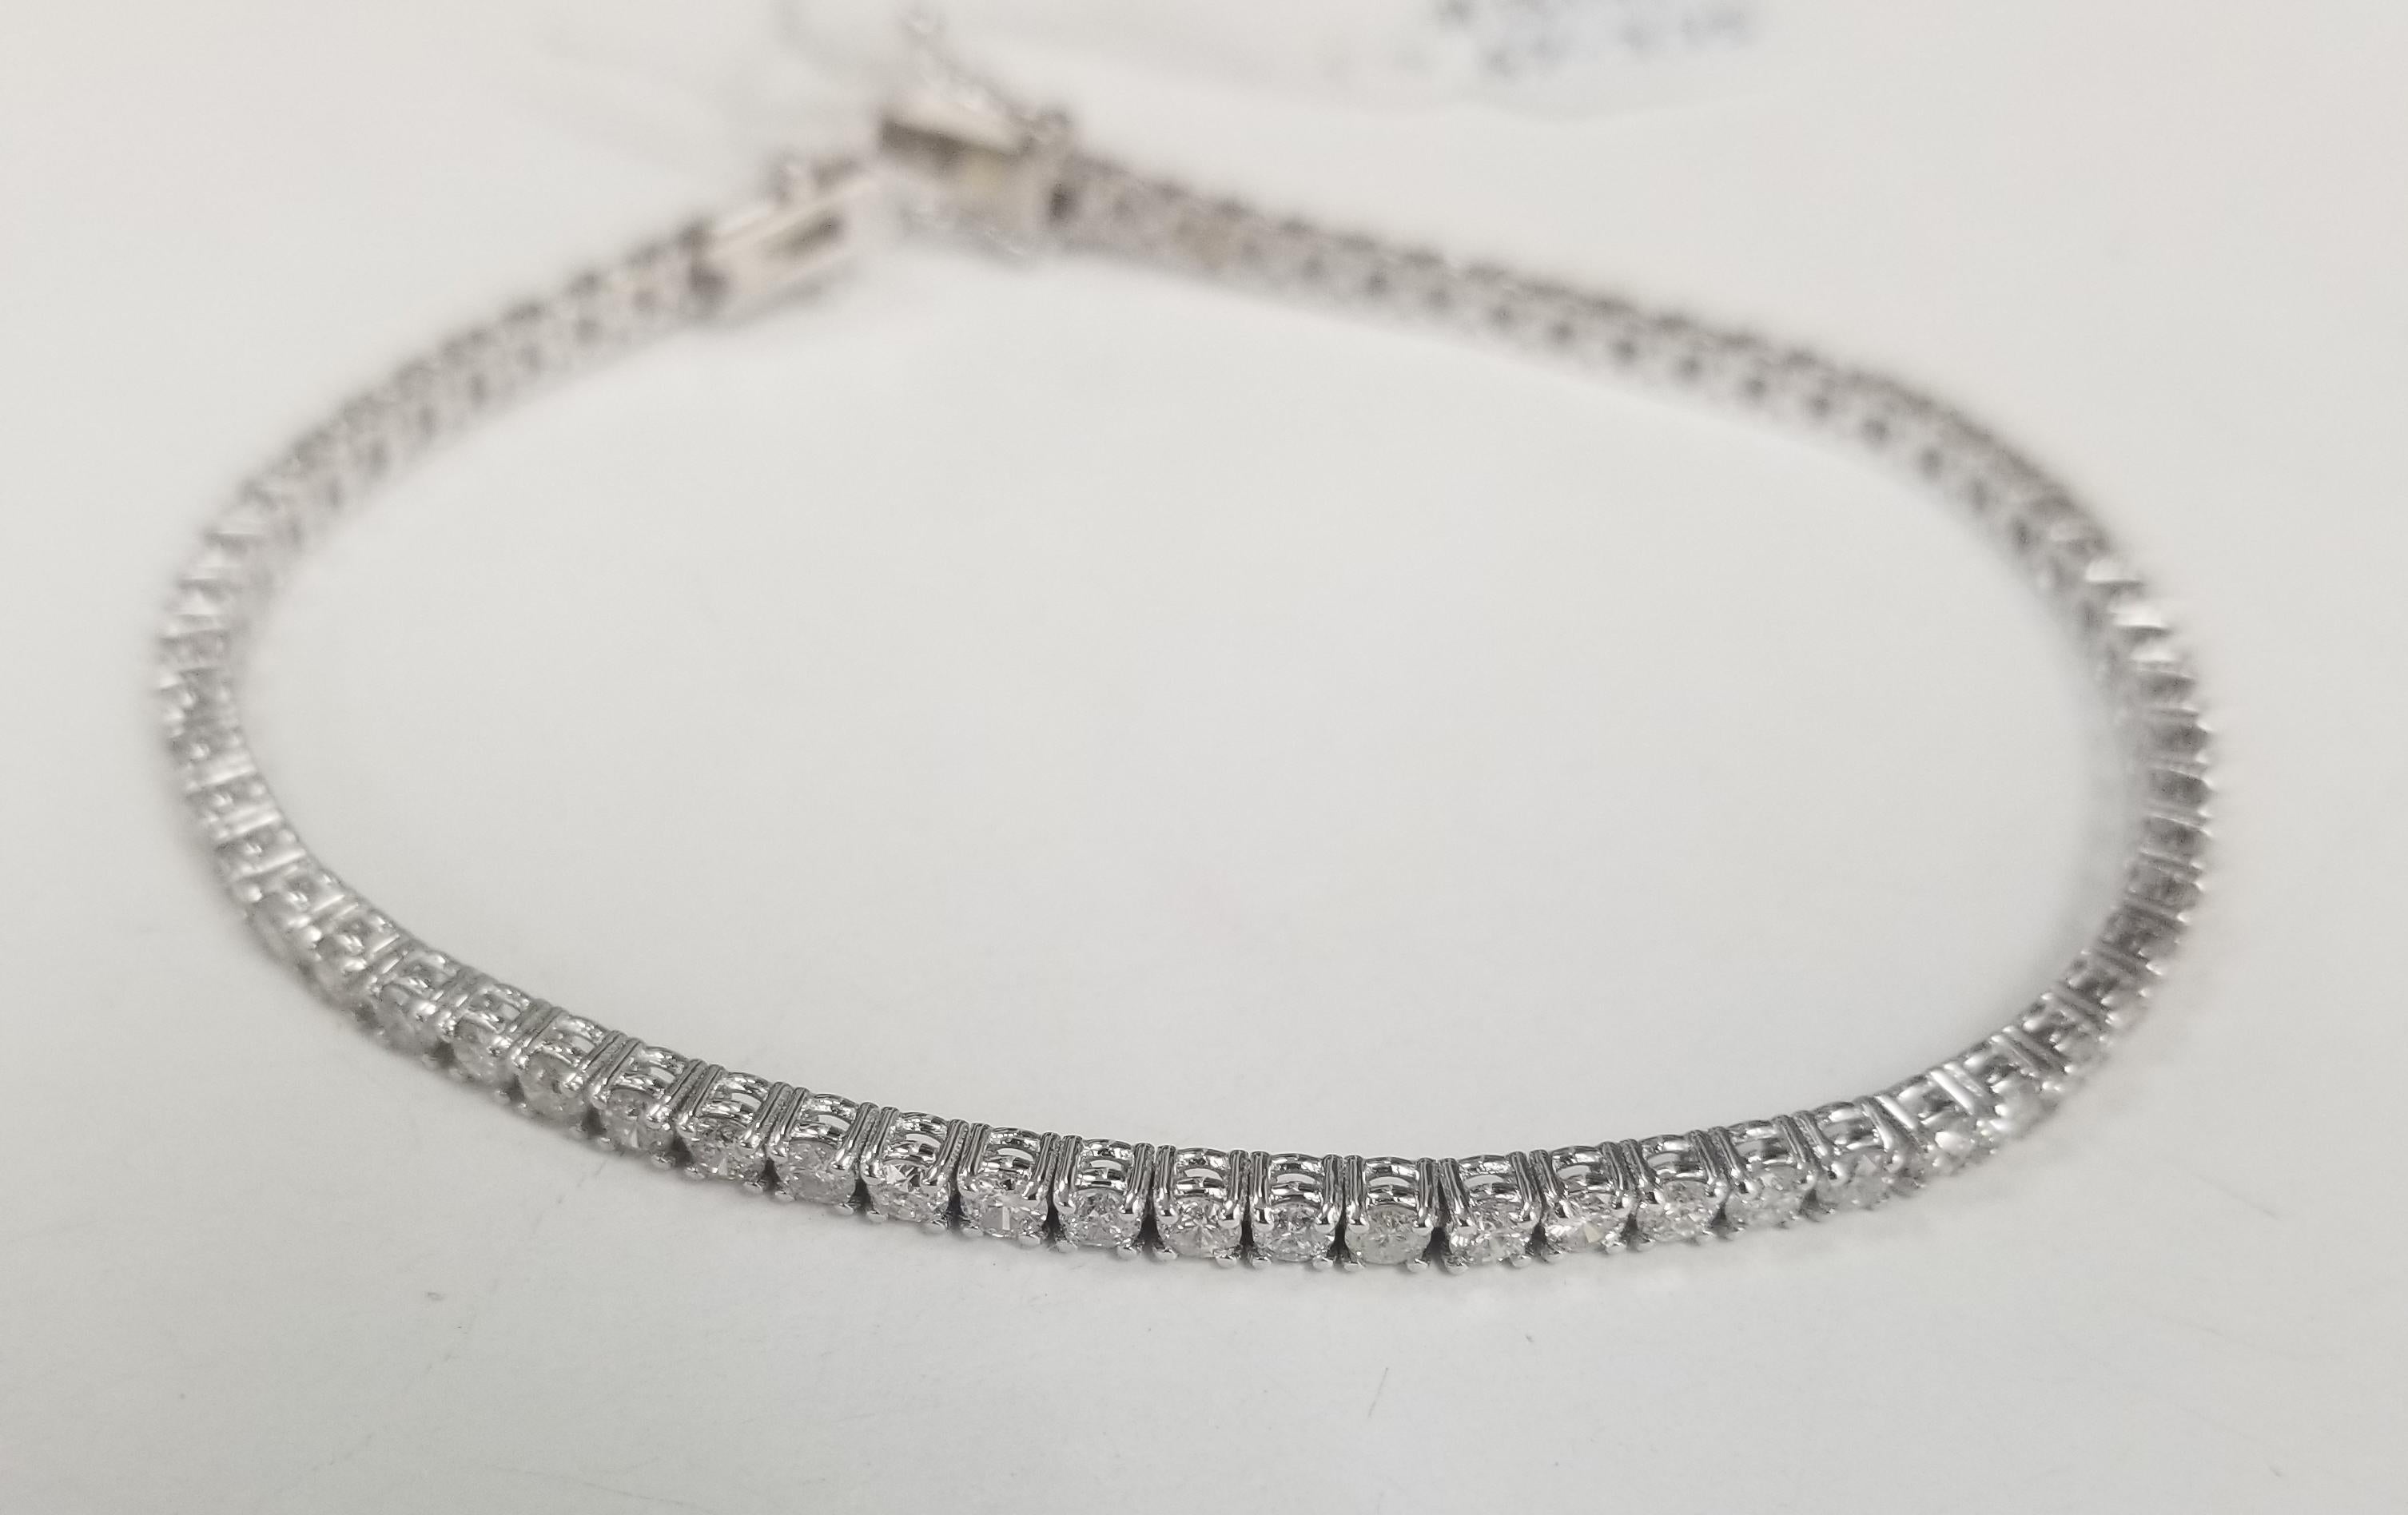 Specifications:
    main stone:ROUND DIAMONDS
    diamonds: 67 PCS
    carat total weight:approximately 3.75 CTW
    color: H-I
    clarity:SI1-2
    brand:CUSTOM MADE
    metal:14K WHITE gold
    type:BRACELET
    weight:8.0 gr
    length:7